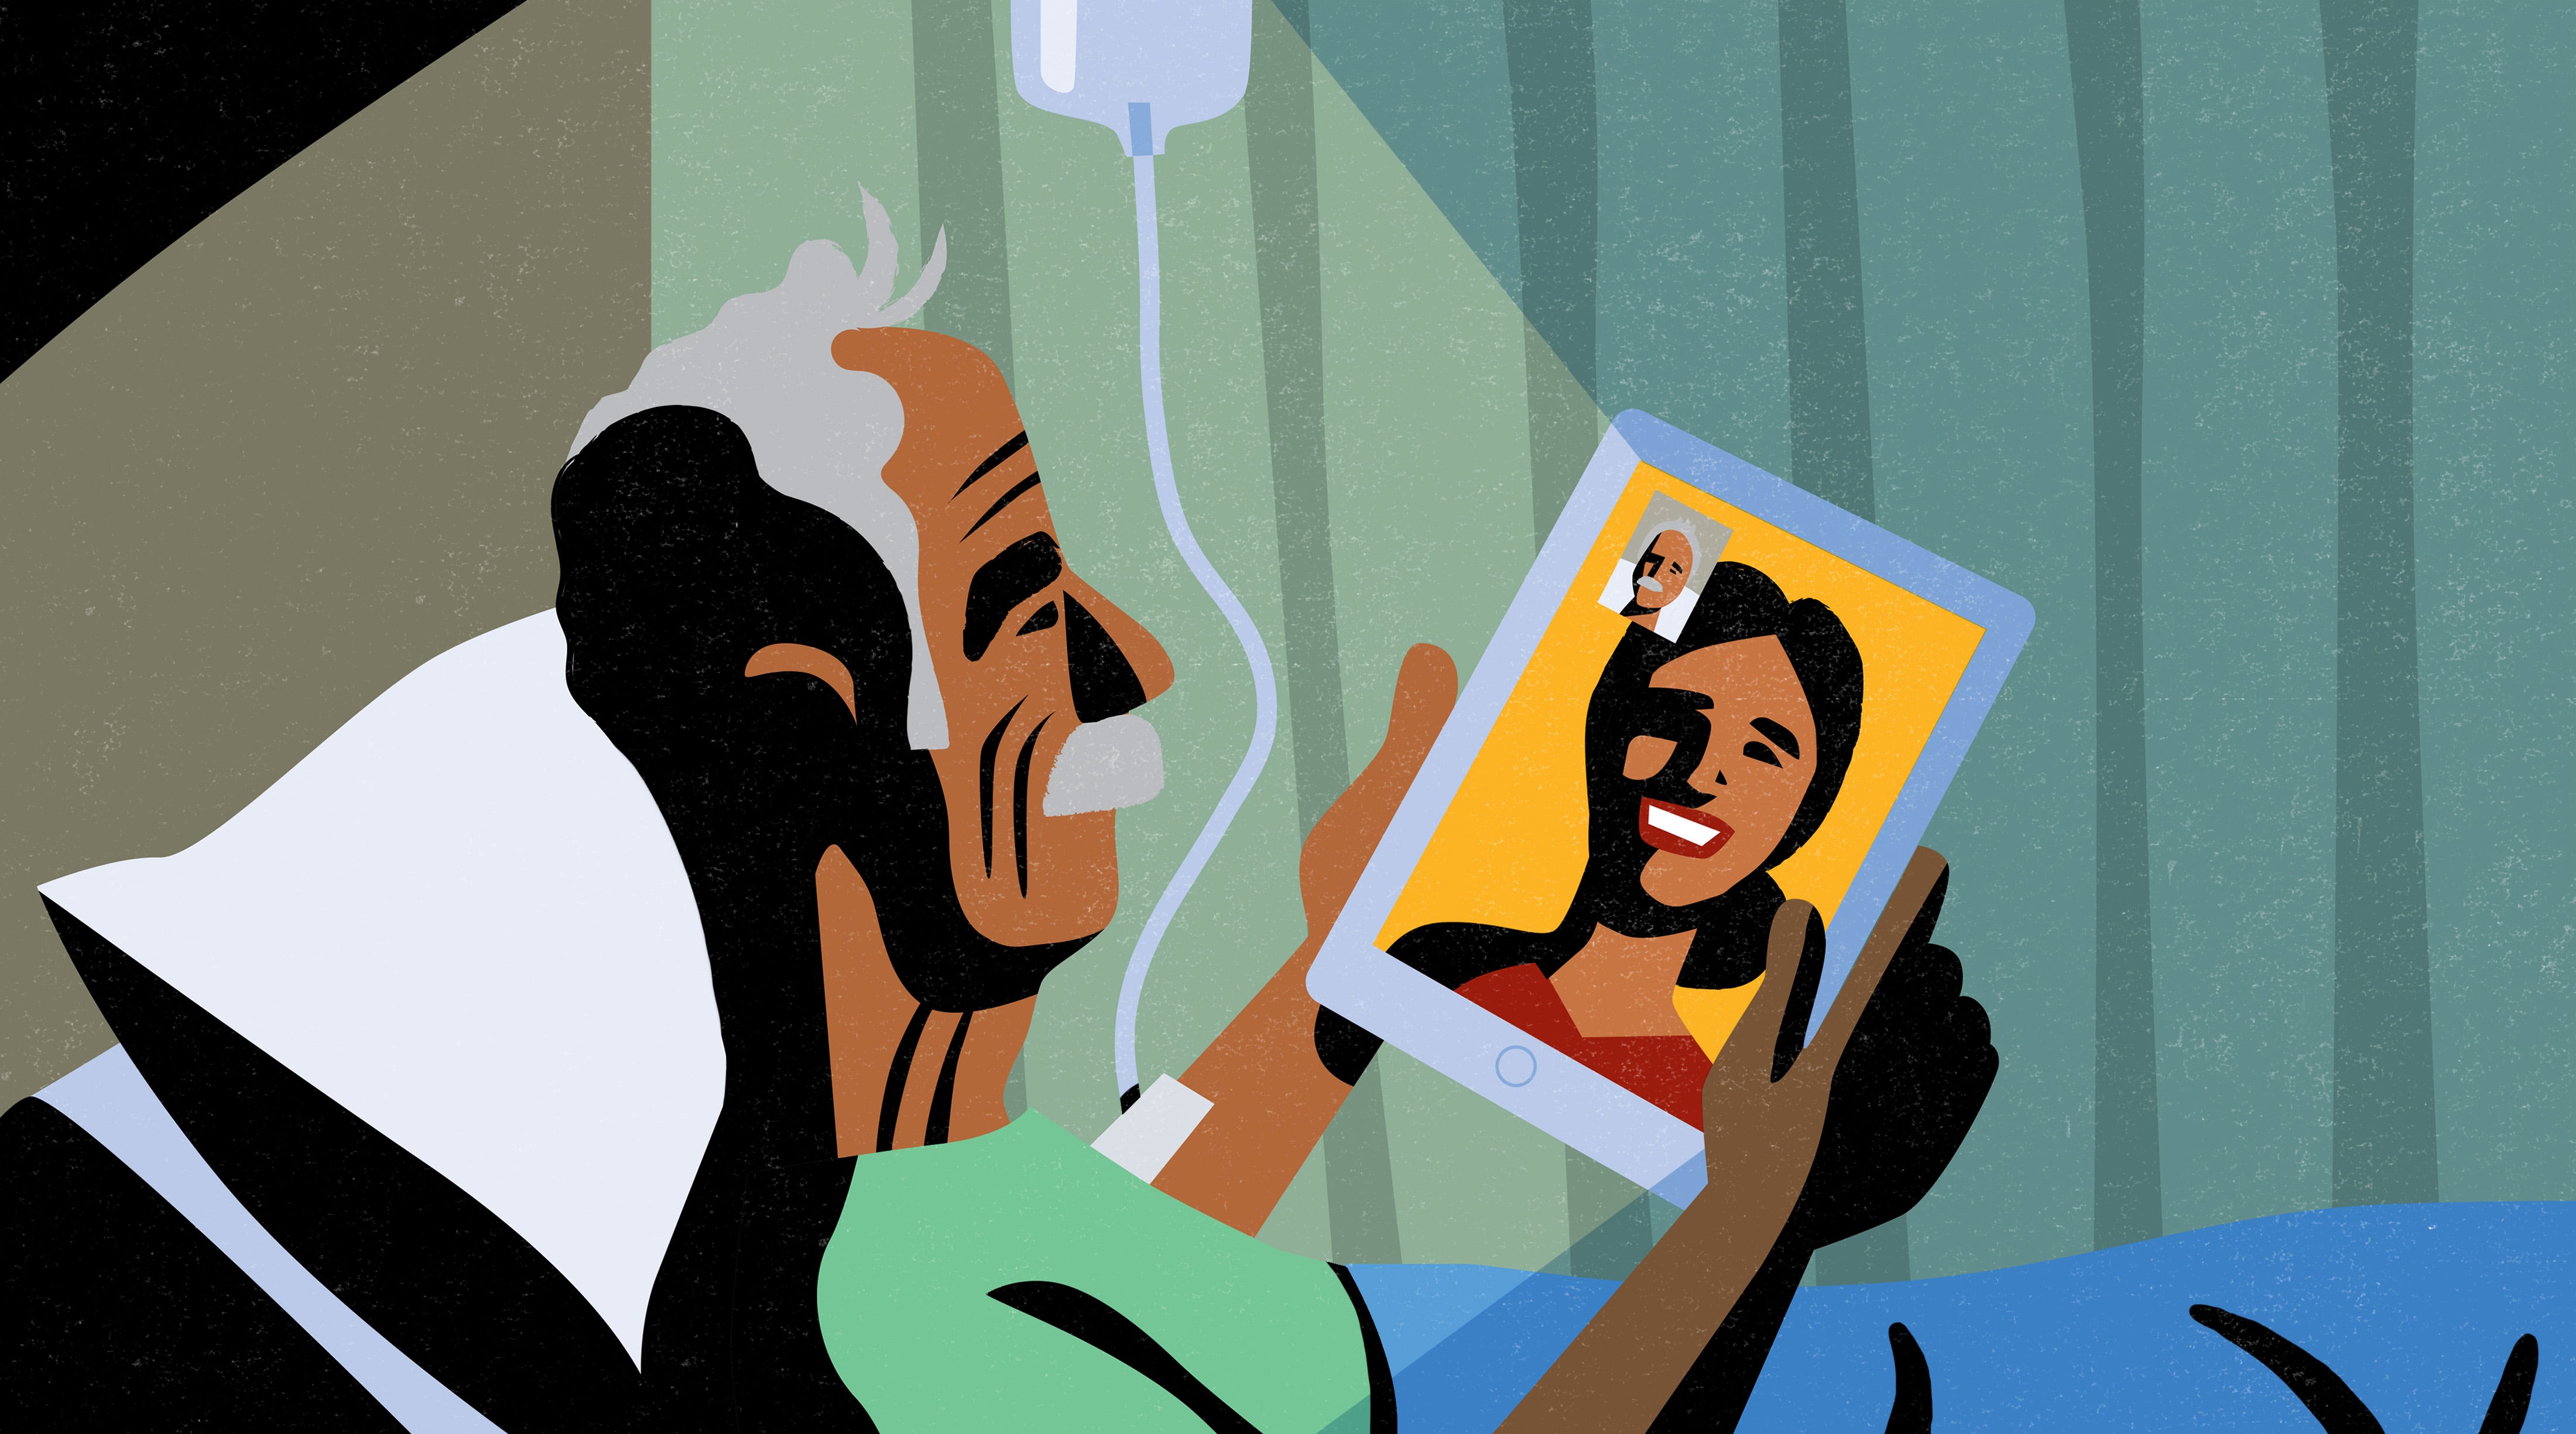 Digital devices can connect loved ones as well as patients with physicians.